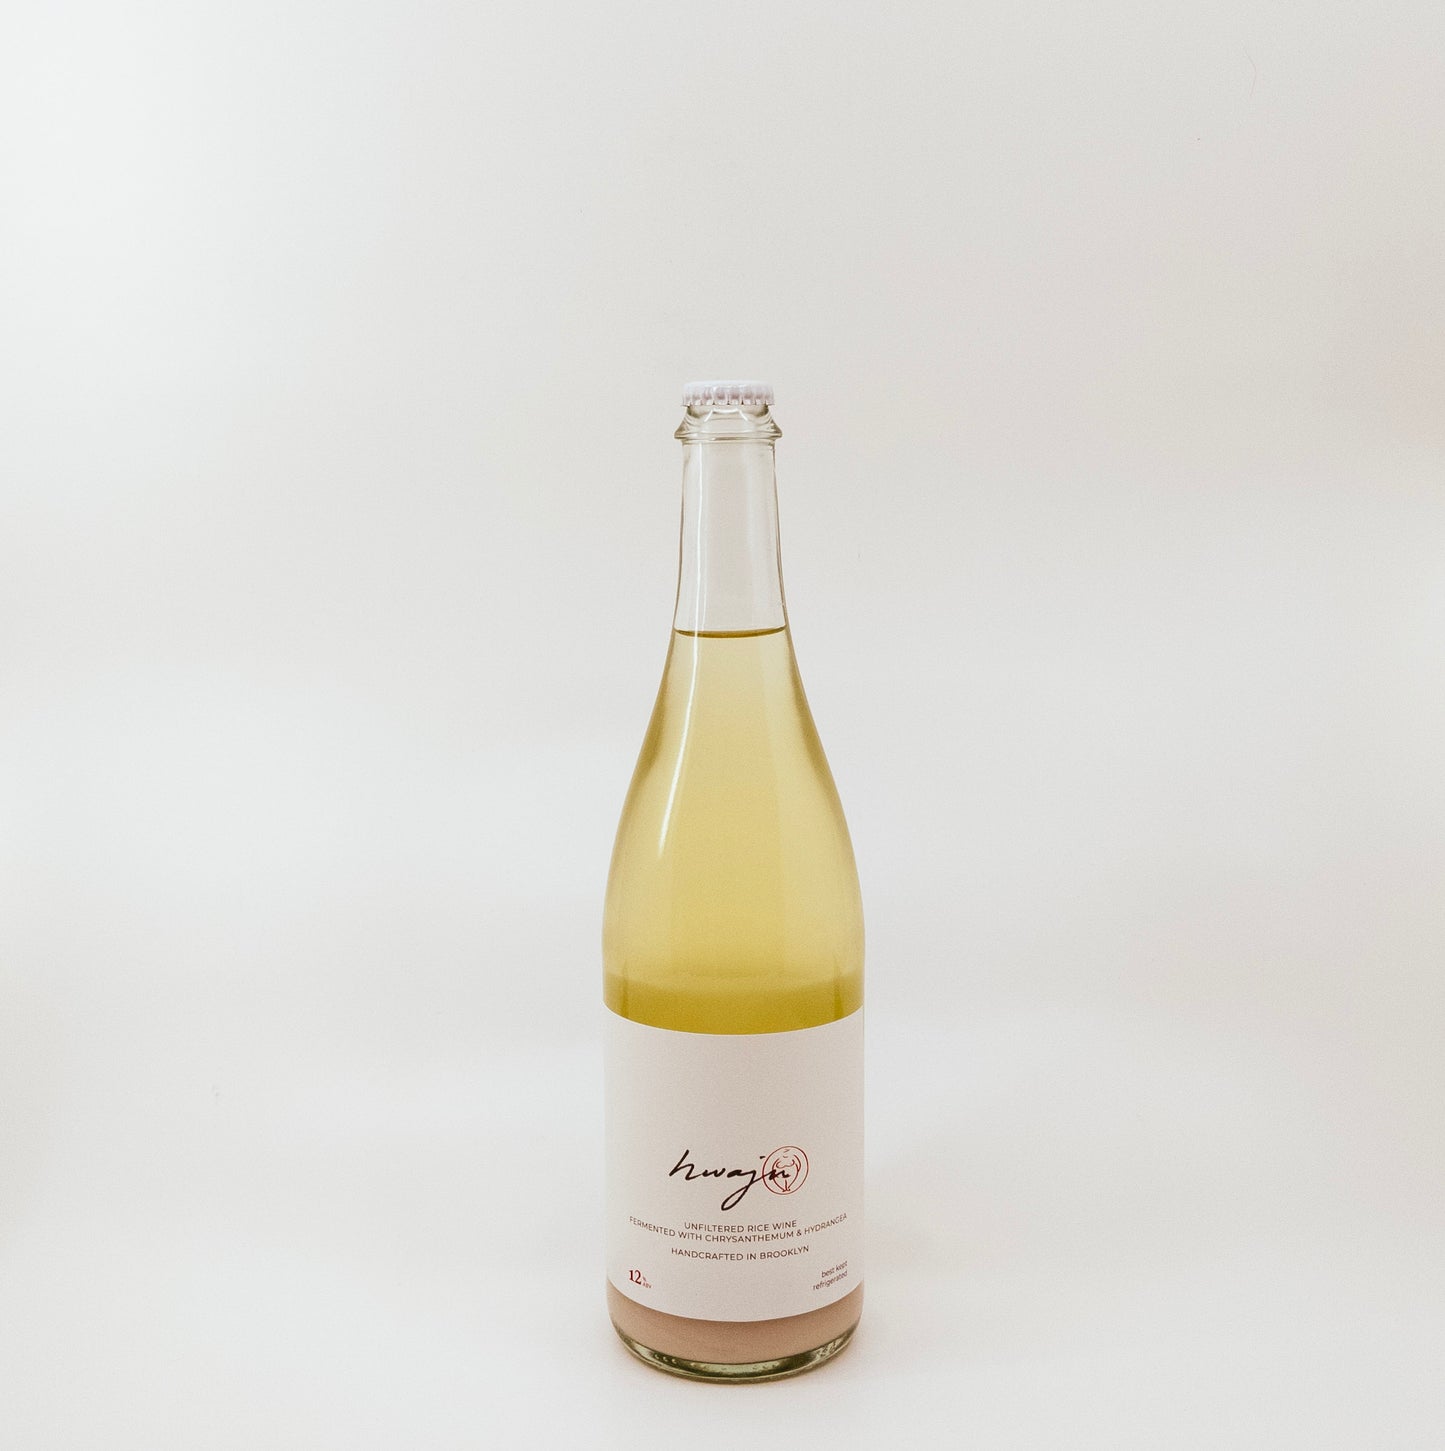 light yellow glass bottle with white label